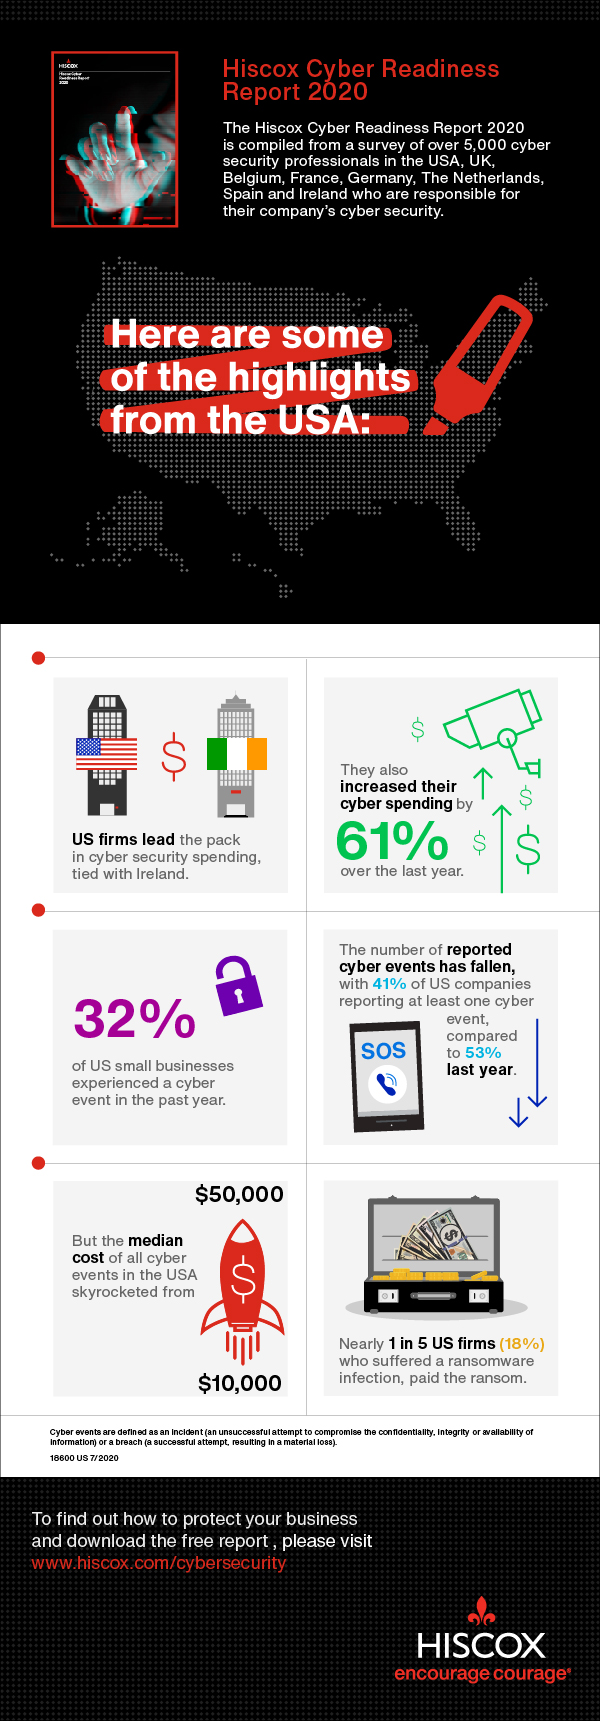 Hiscox Cyber Readiness Report 2020 Infographic When Hackers Attack